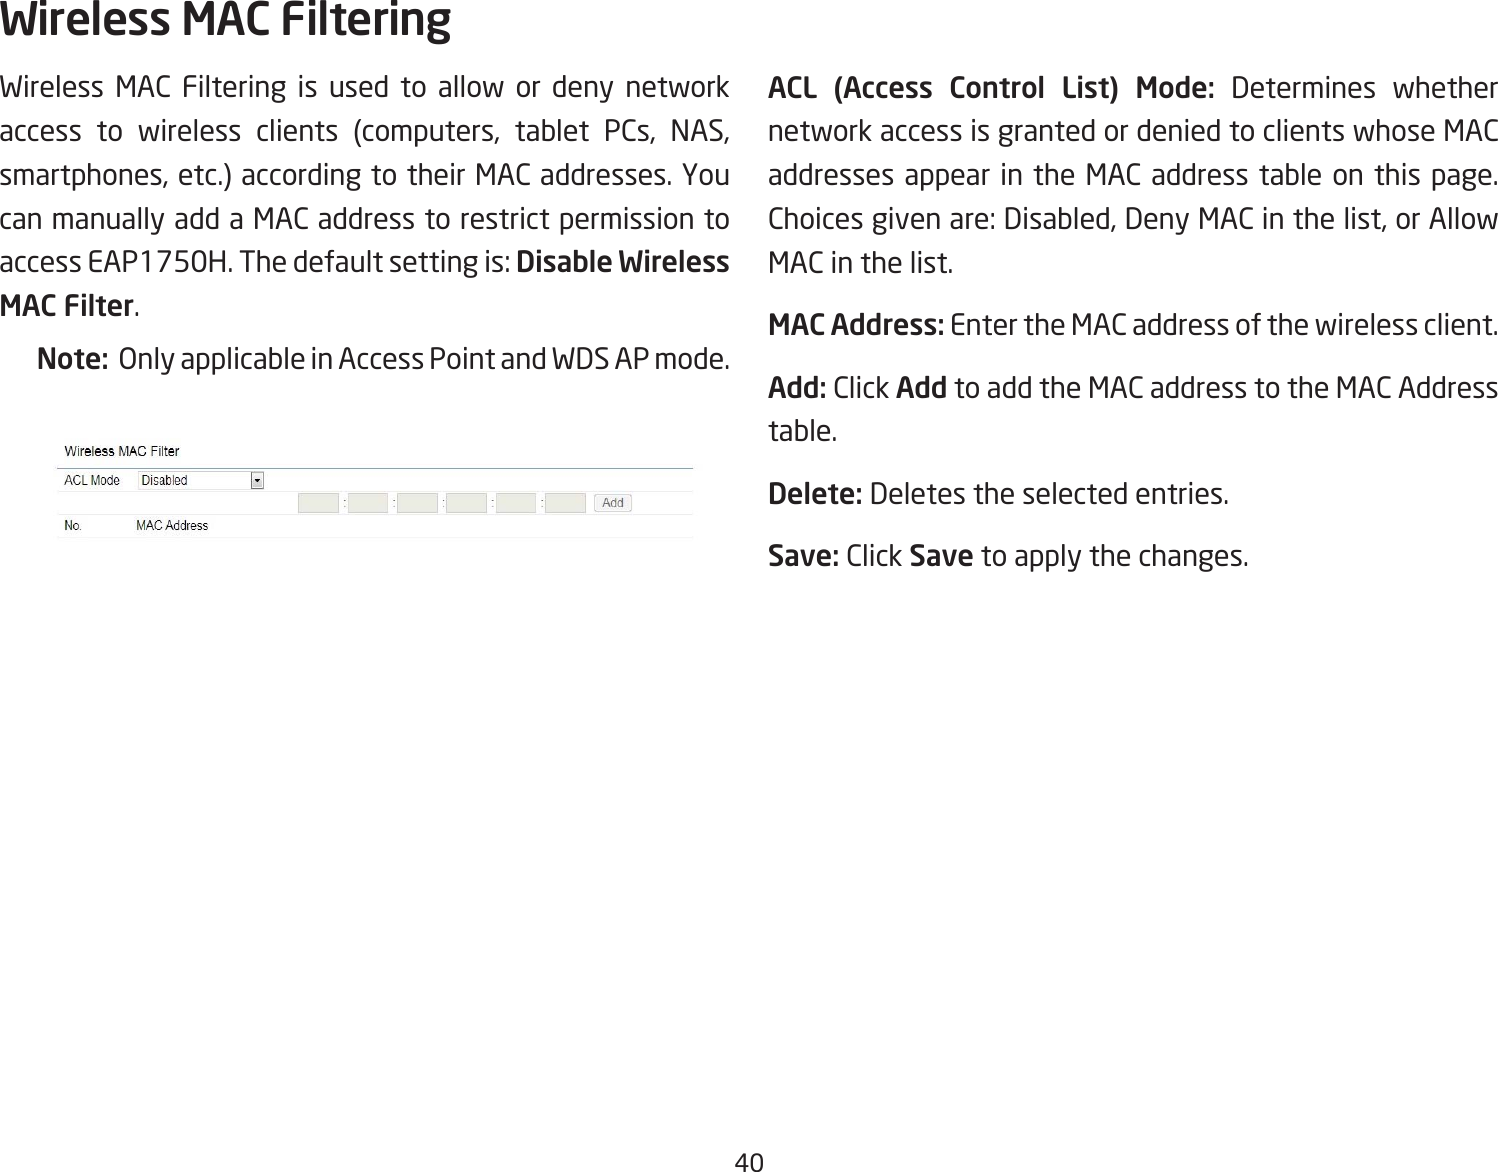 40Wireless MAC Filtering is used to allow or deny network access to wireless clients (computers, tablet PCs, NAS, smartphones, etc.) according to their MAC addresses. You can manually add a MAC address to restrict permission to accessEAP1750H.Thedefaultsettingis:Disable Wireless MAC Filter.Note:  Only applicable in Access Point and WDS AP mode.ACL  (Access  Control  List)  Mode: Determines whether network access is granted or denied to clients whose MAC addresses appear in the MAC address table on this page. Choicesgivenare:Disabled,DenyMACinthelist,orAllowMAC in the list.MAC Address: Enter the MAC address of the wireless client.Add: Click Add to add the MAC address to the MAC Address table.Delete: Deletes the selected entries.Save: Click Save to apply the changes.Wireless MAC Filtering